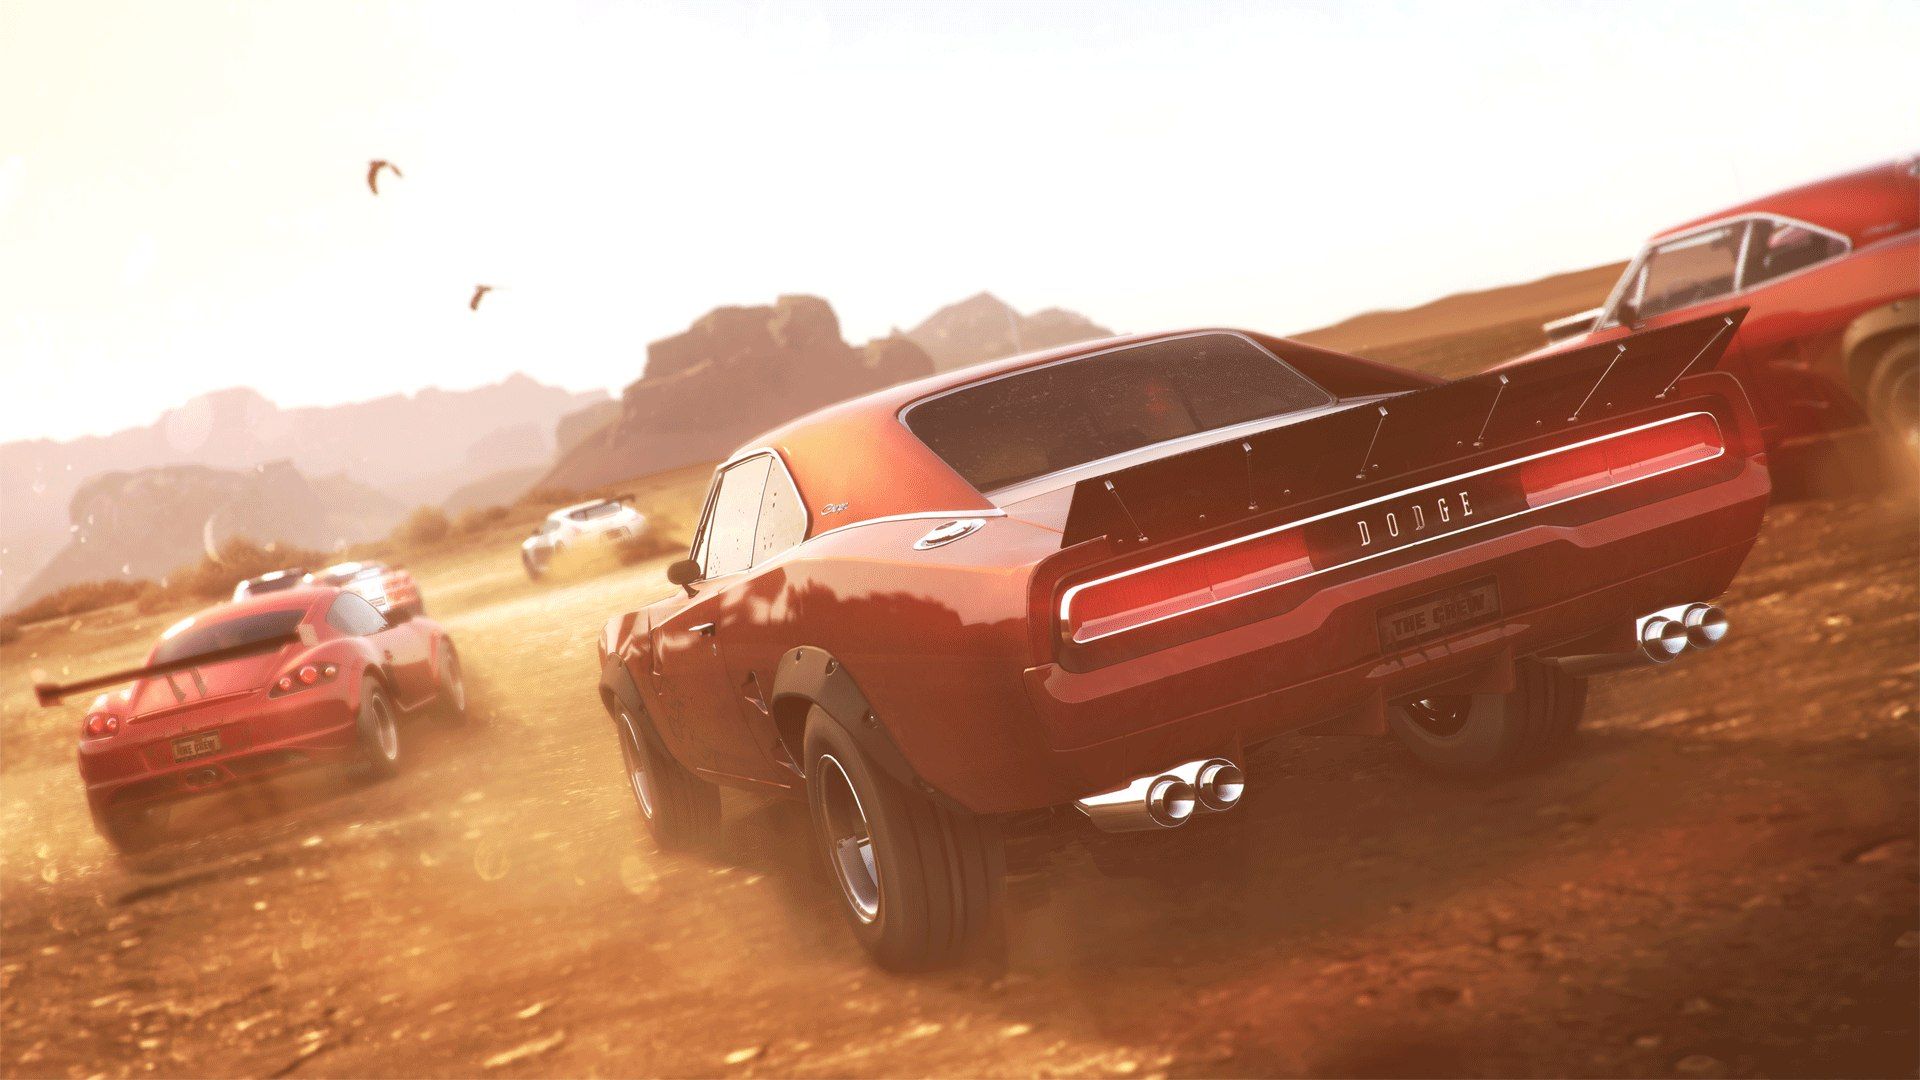 Released For Upcoming 'The Crew' Driving Game: Video